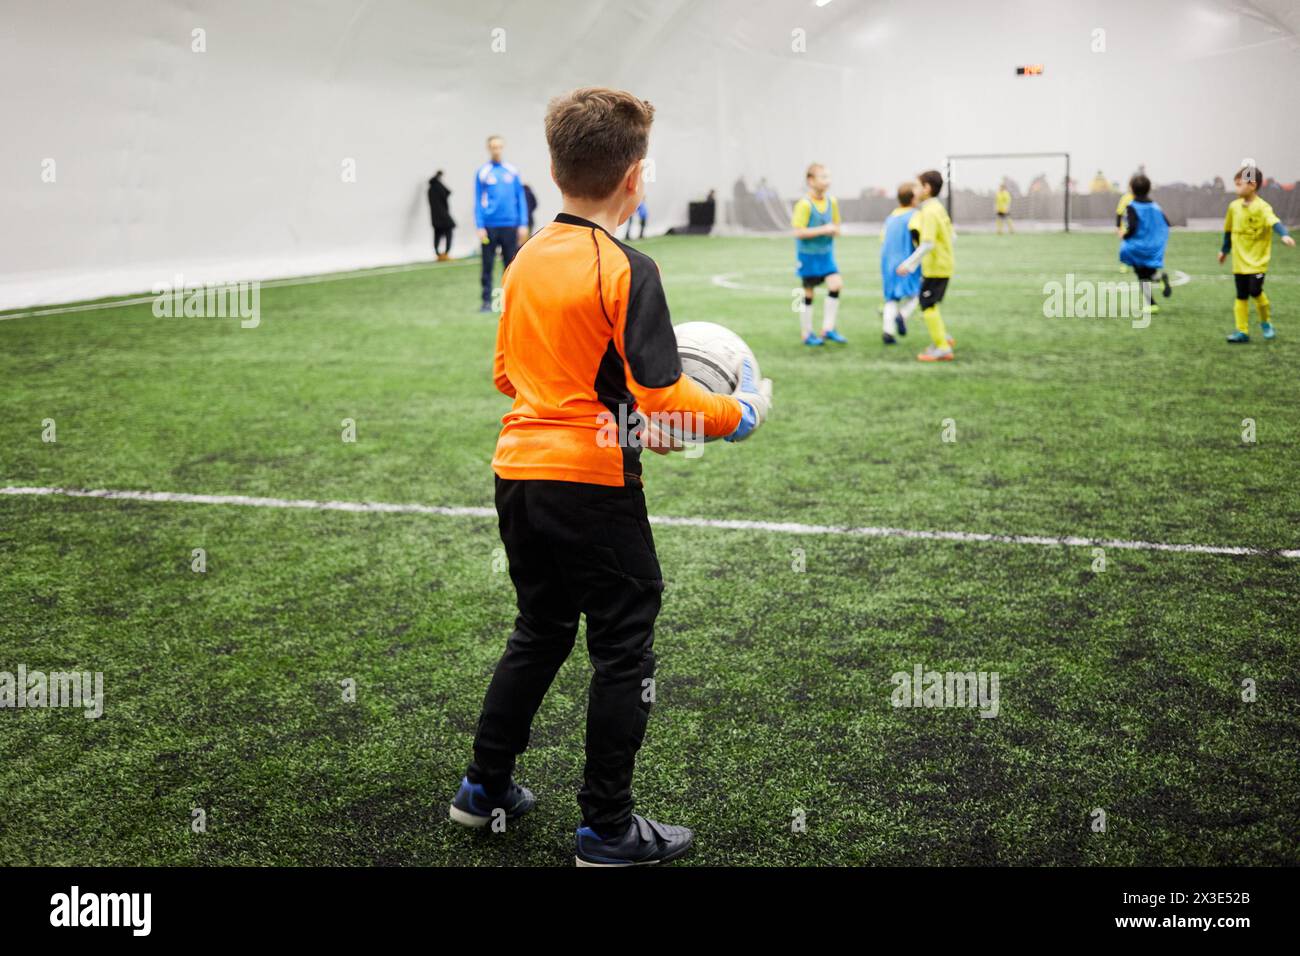 Boy goalkeeper going to put the ball into play, rear side view. Stock Photo